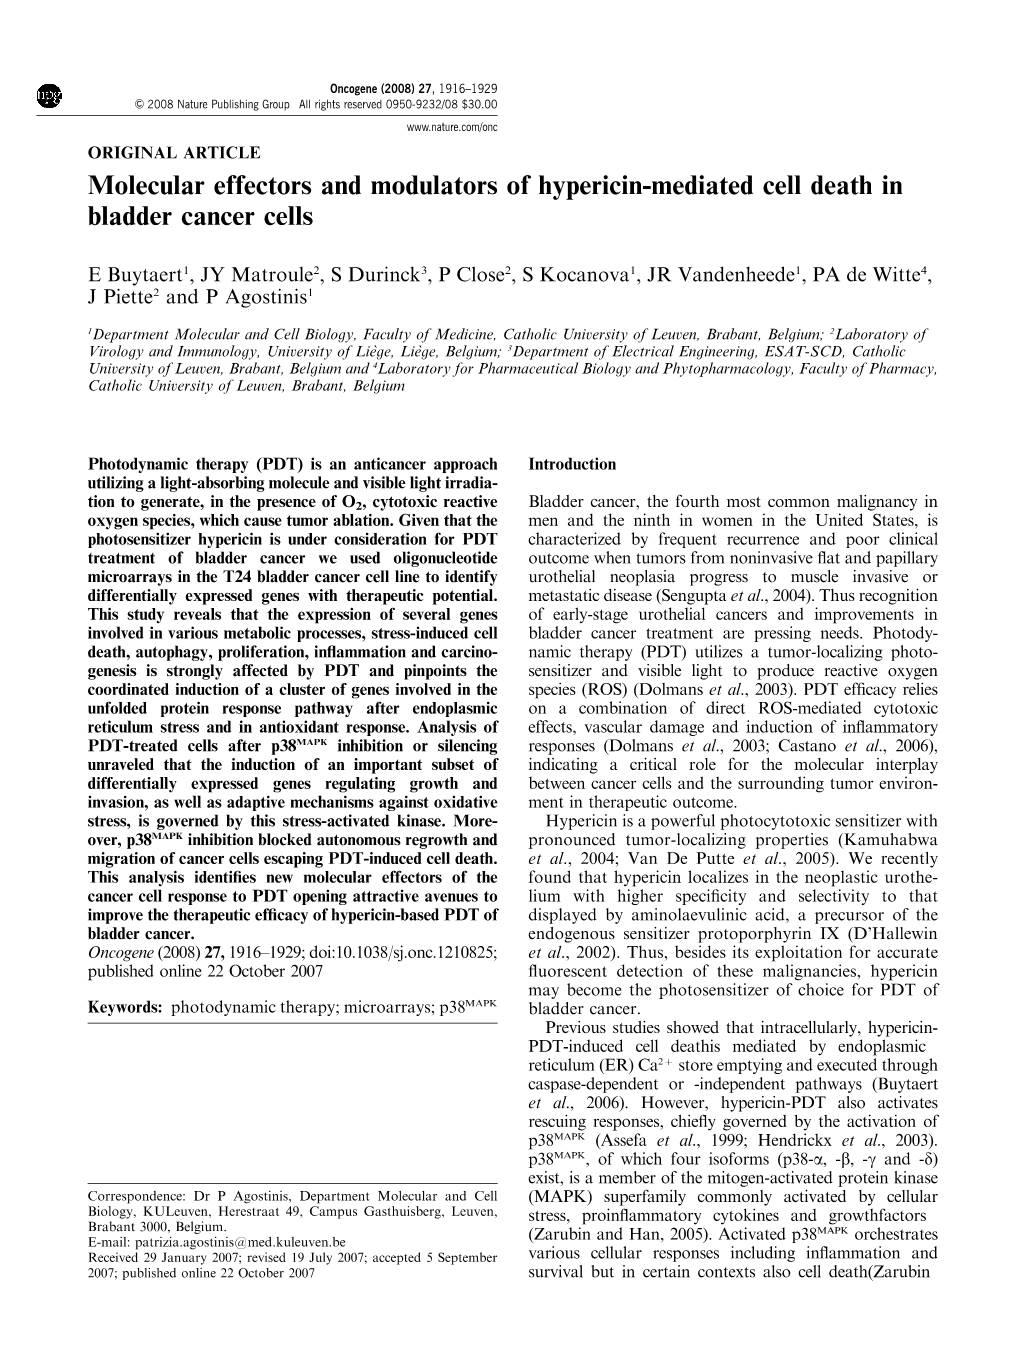 Molecular Effectors and Modulators of Hypericin-Mediated Cell Death in Bladder Cancer Cells